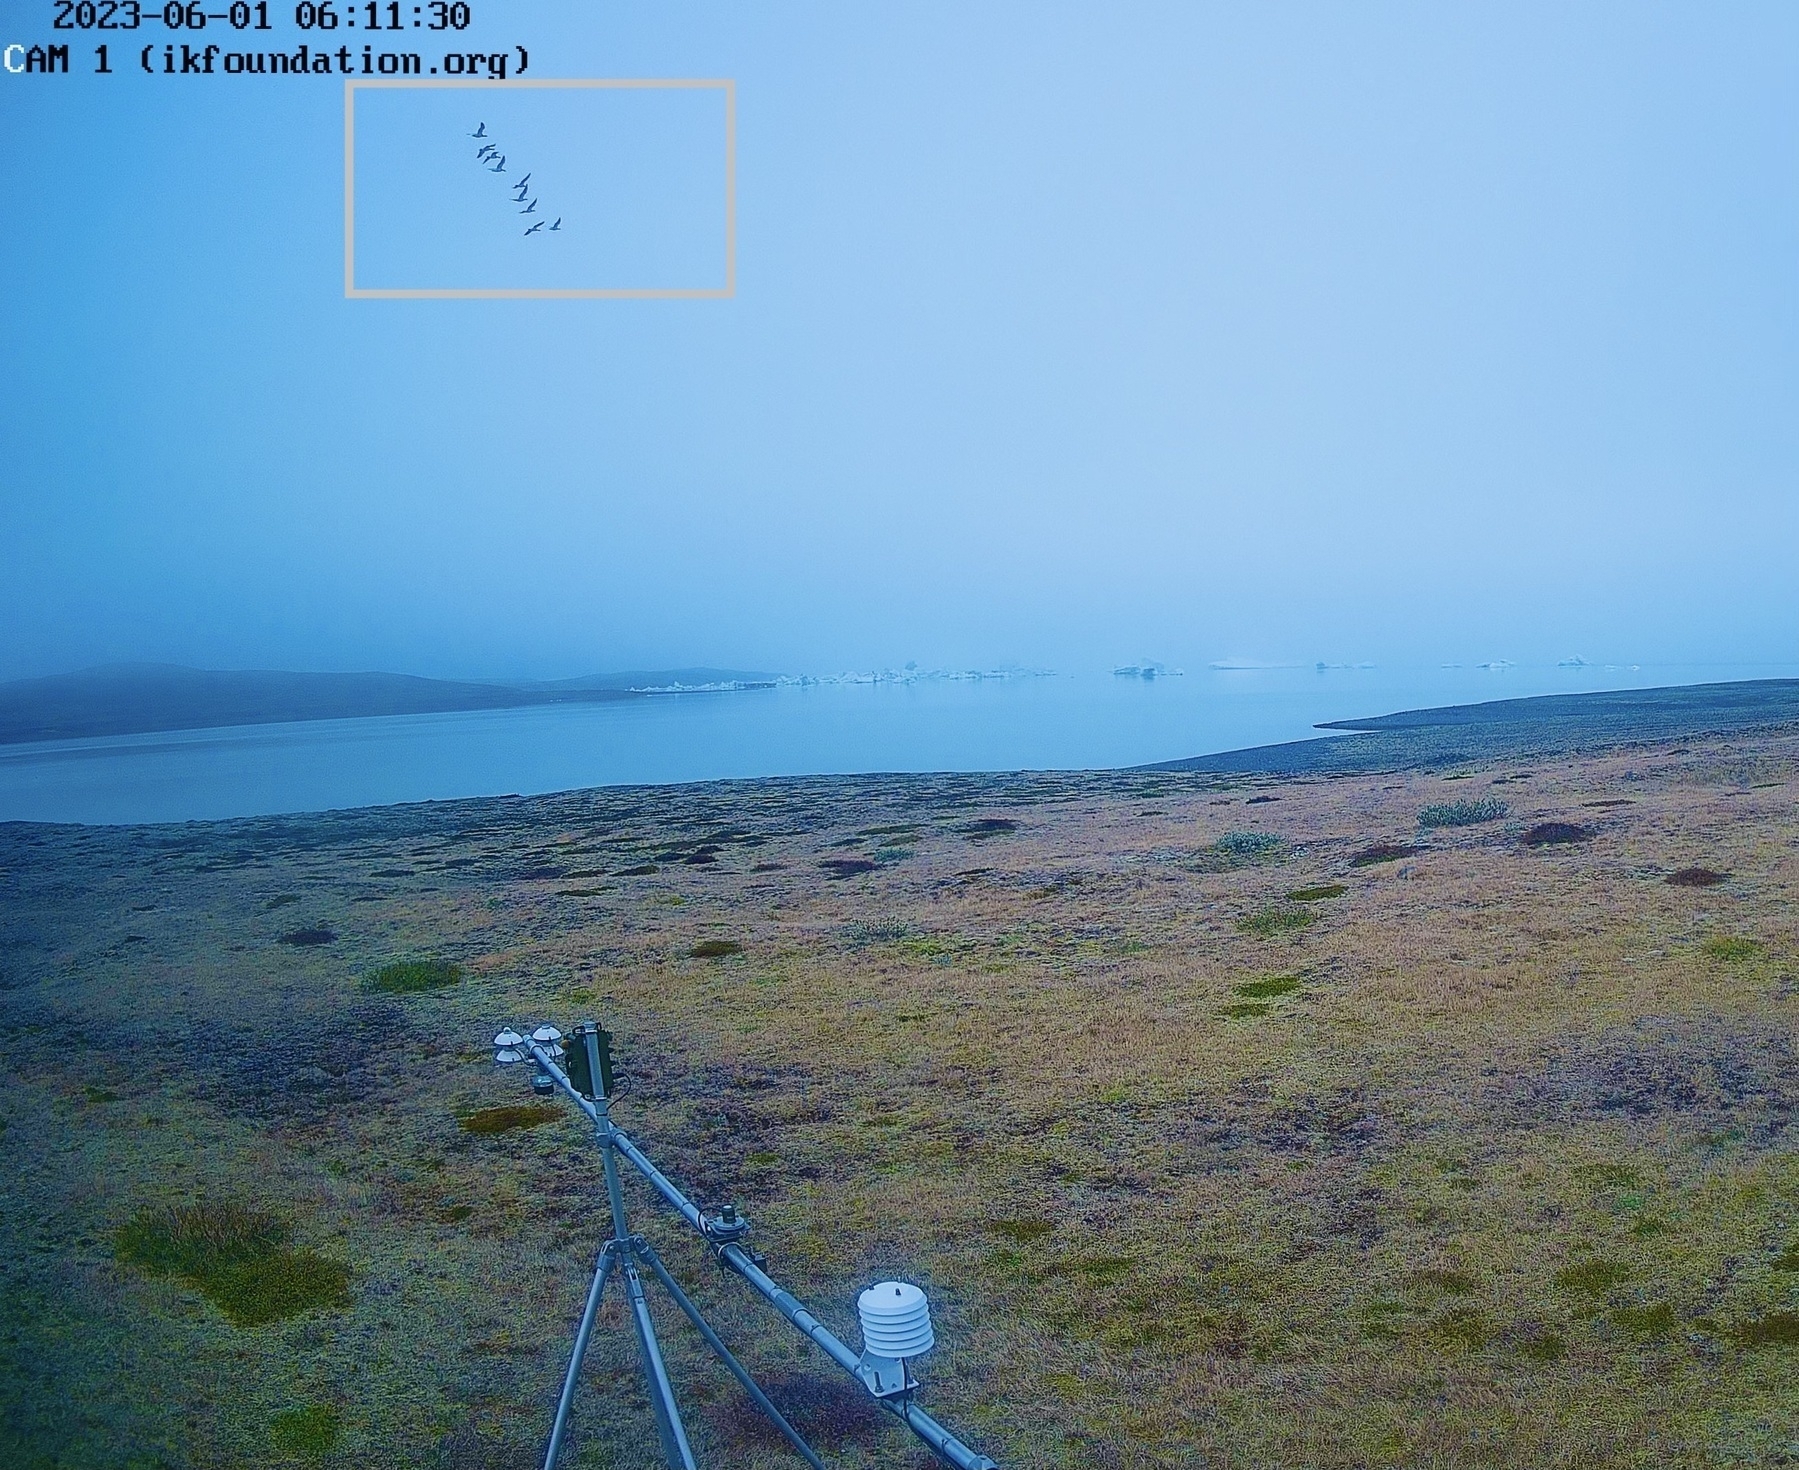 THE FIELD STATION | SOLANDER’S EYE #Solander250 in #vatnajokullnationalpark @uni_iceland
Solander’s Eye observed a flock of geese. Audio recordings are also made in intervals around the clock, but not online, published afterwards.